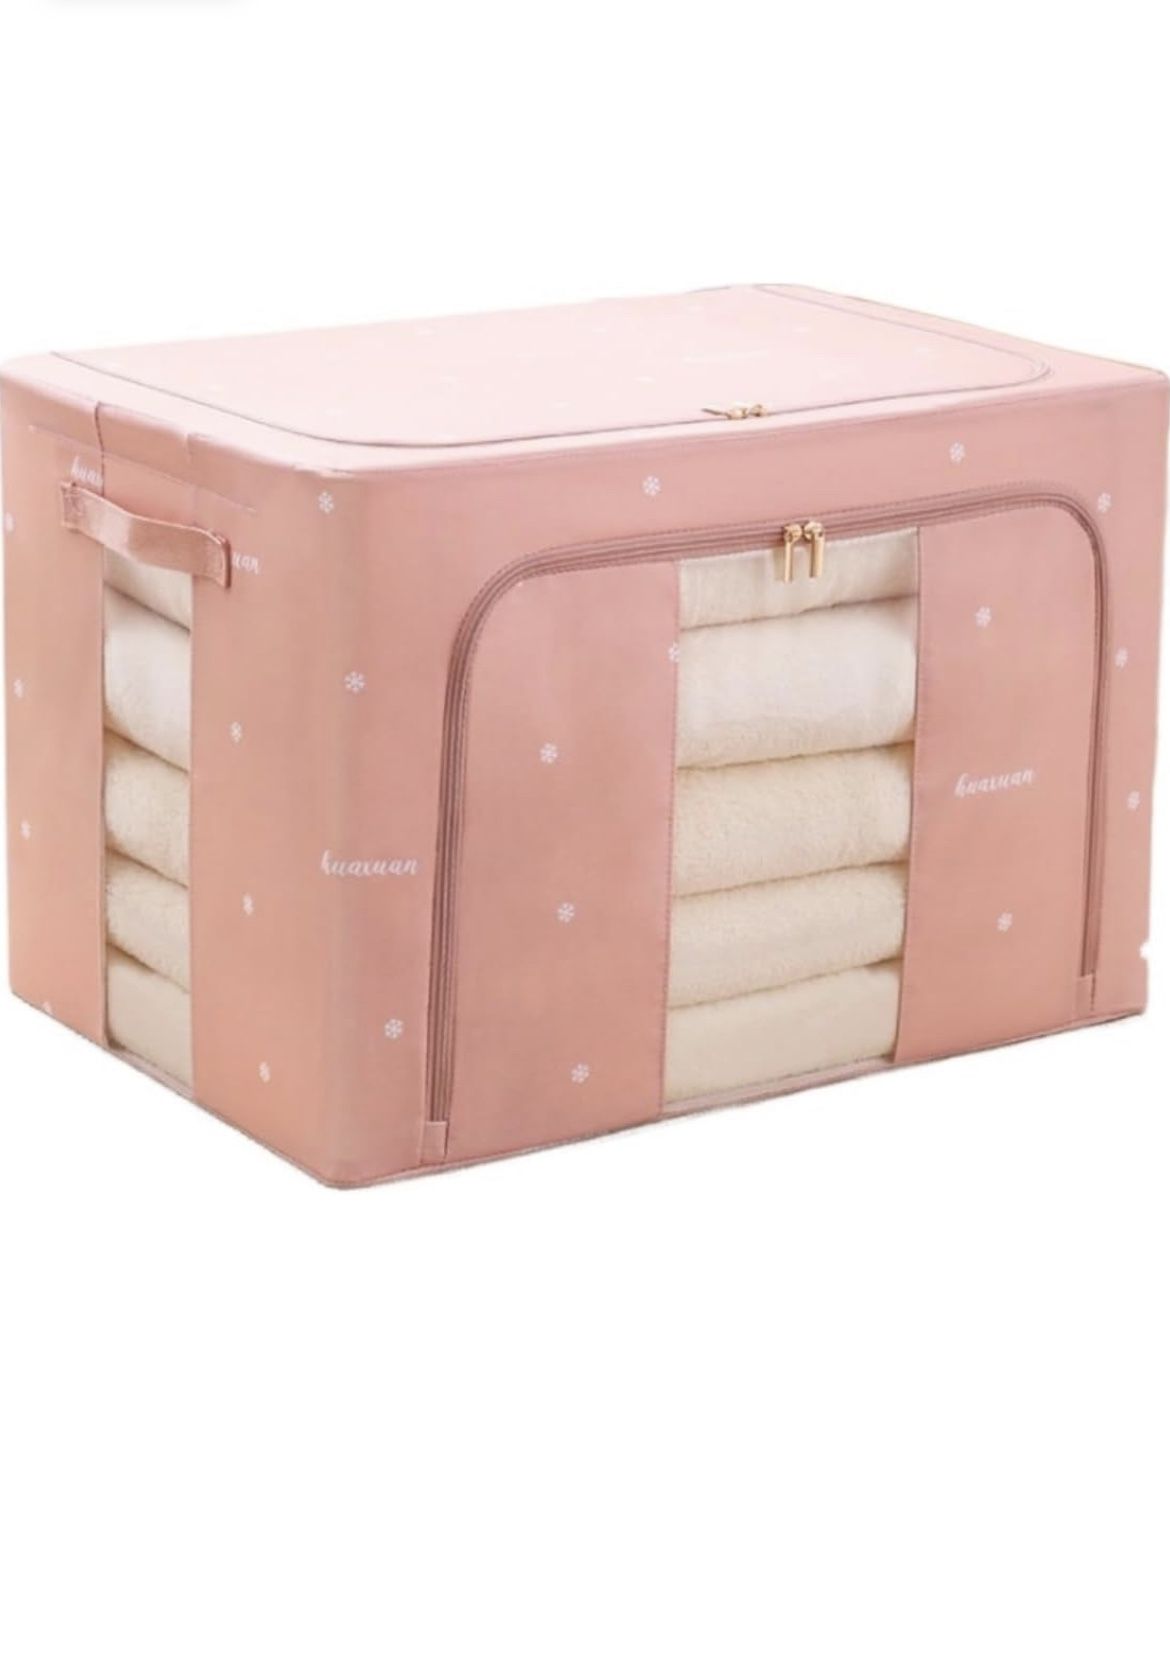 Storage Bags Storage Containers for Clothes Foldable Clothes Storage Containers Blanket Storage Bags Stackable Quilt Containers Clothes Storage Bins C